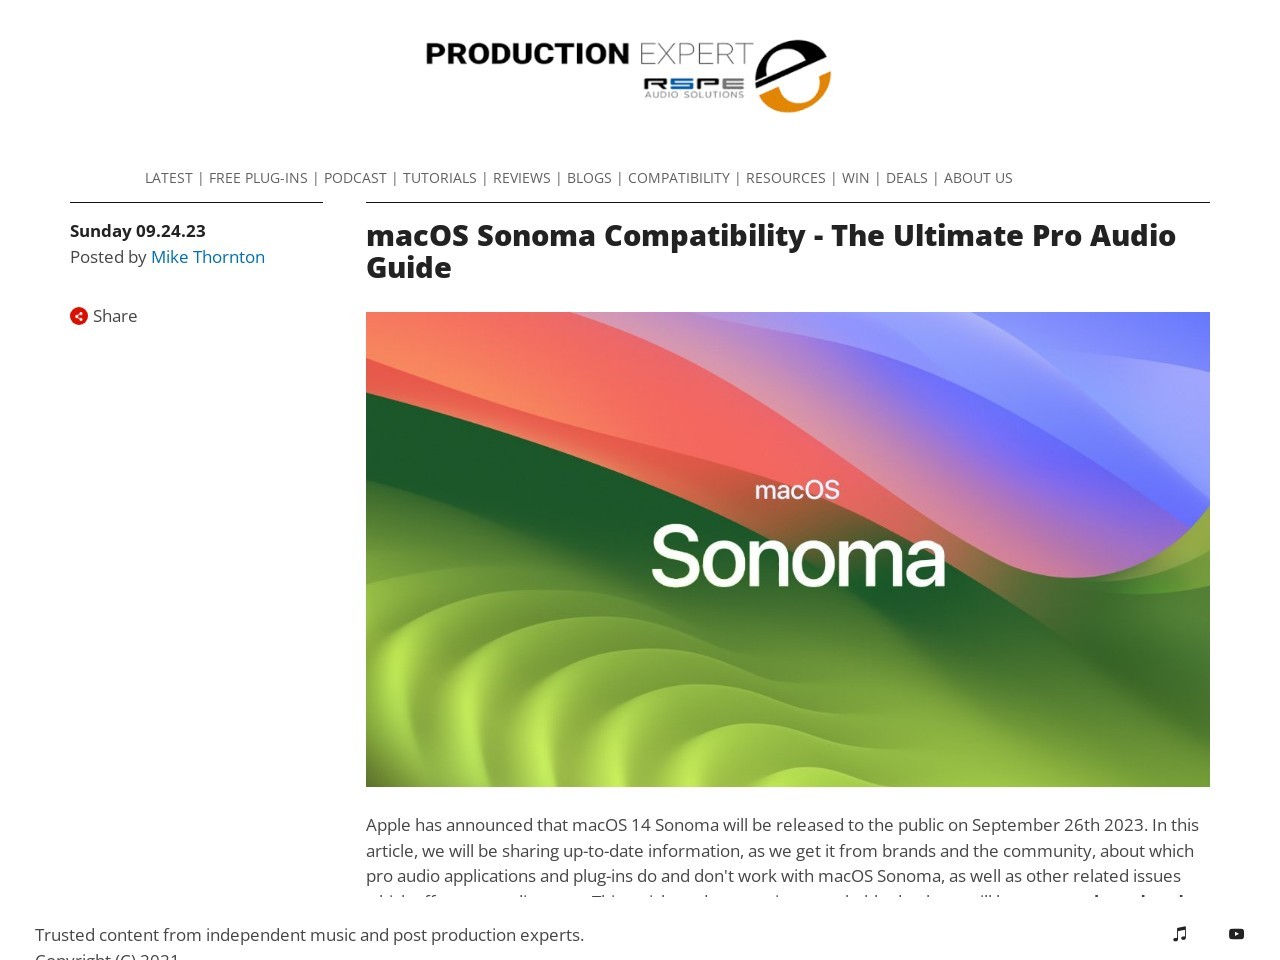 macOS Sonoma Compatibility - The Ultimate Pro Audio Guide | Production Expert